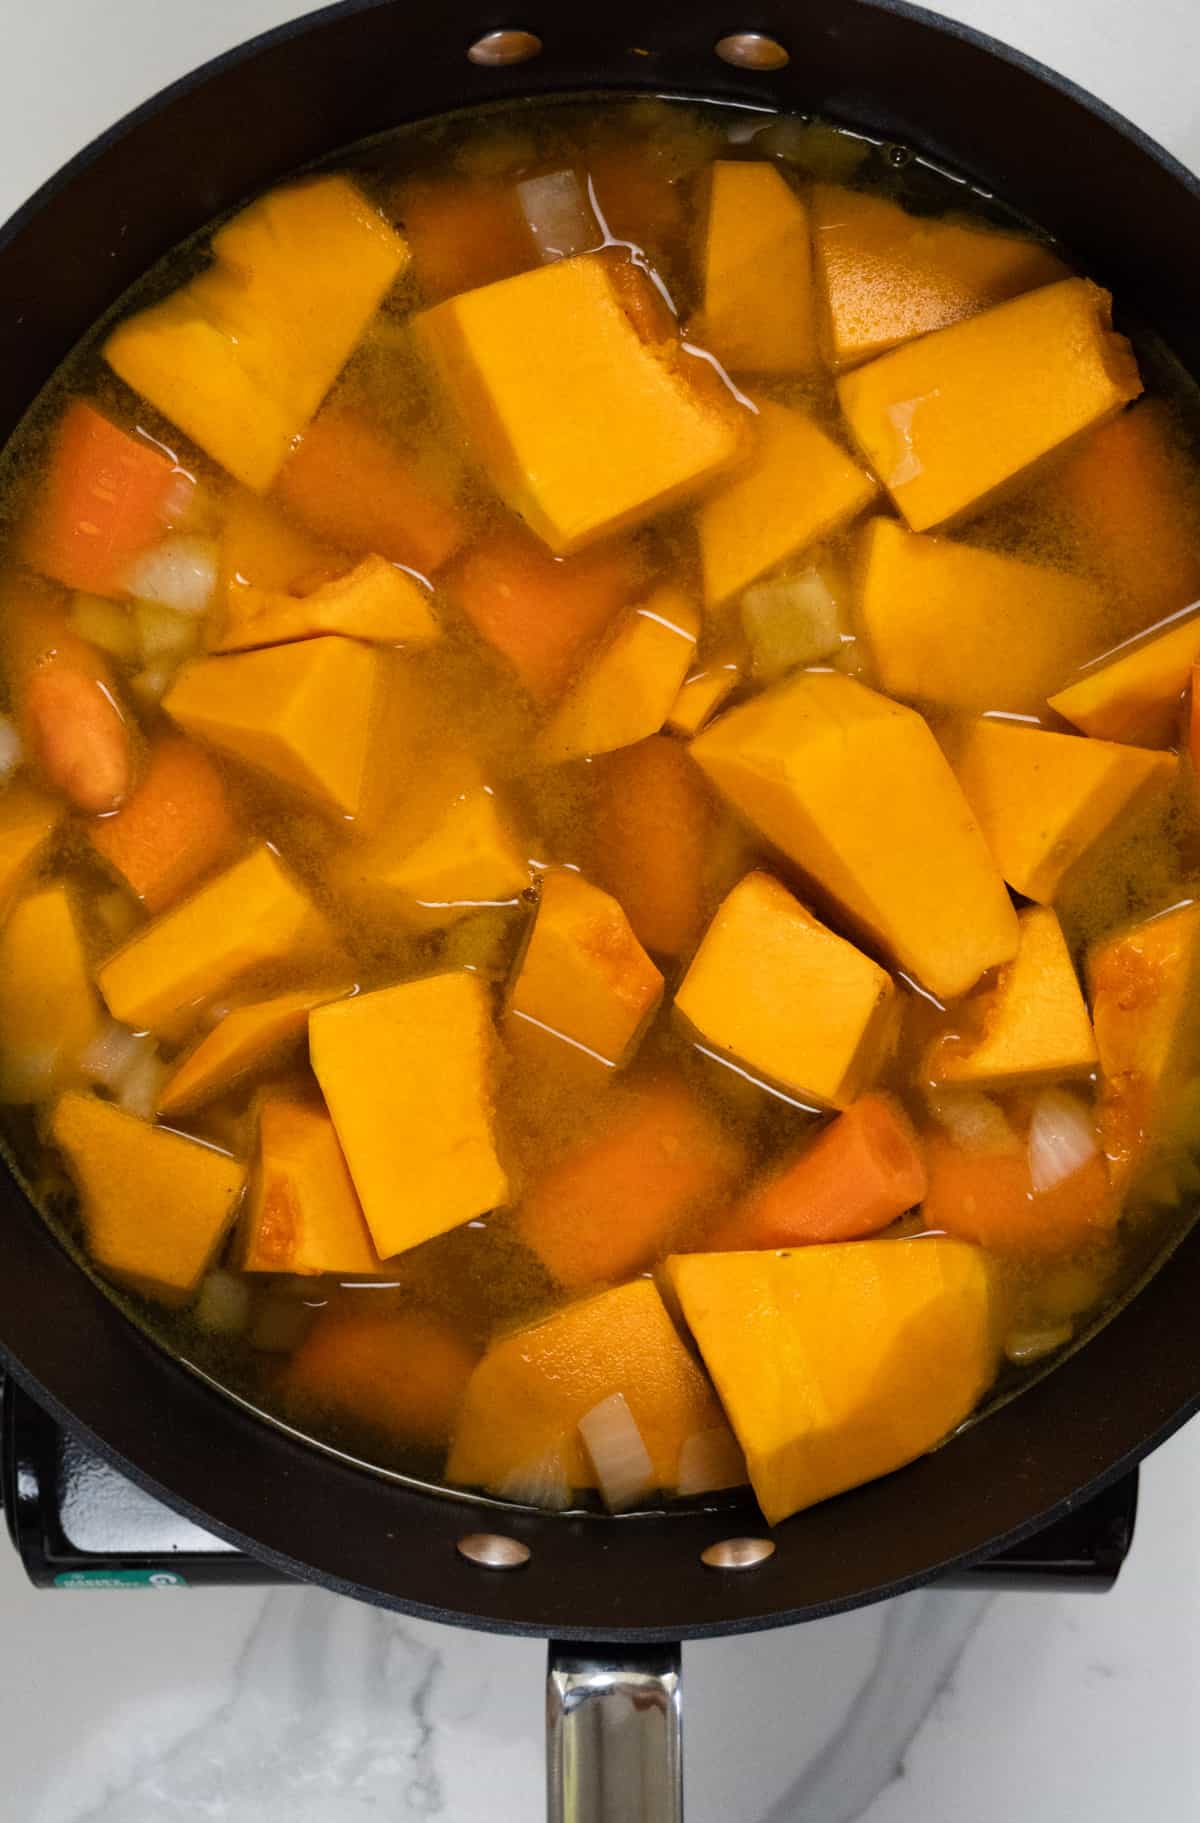 chopped carrots and pumpkin with water in a black pot